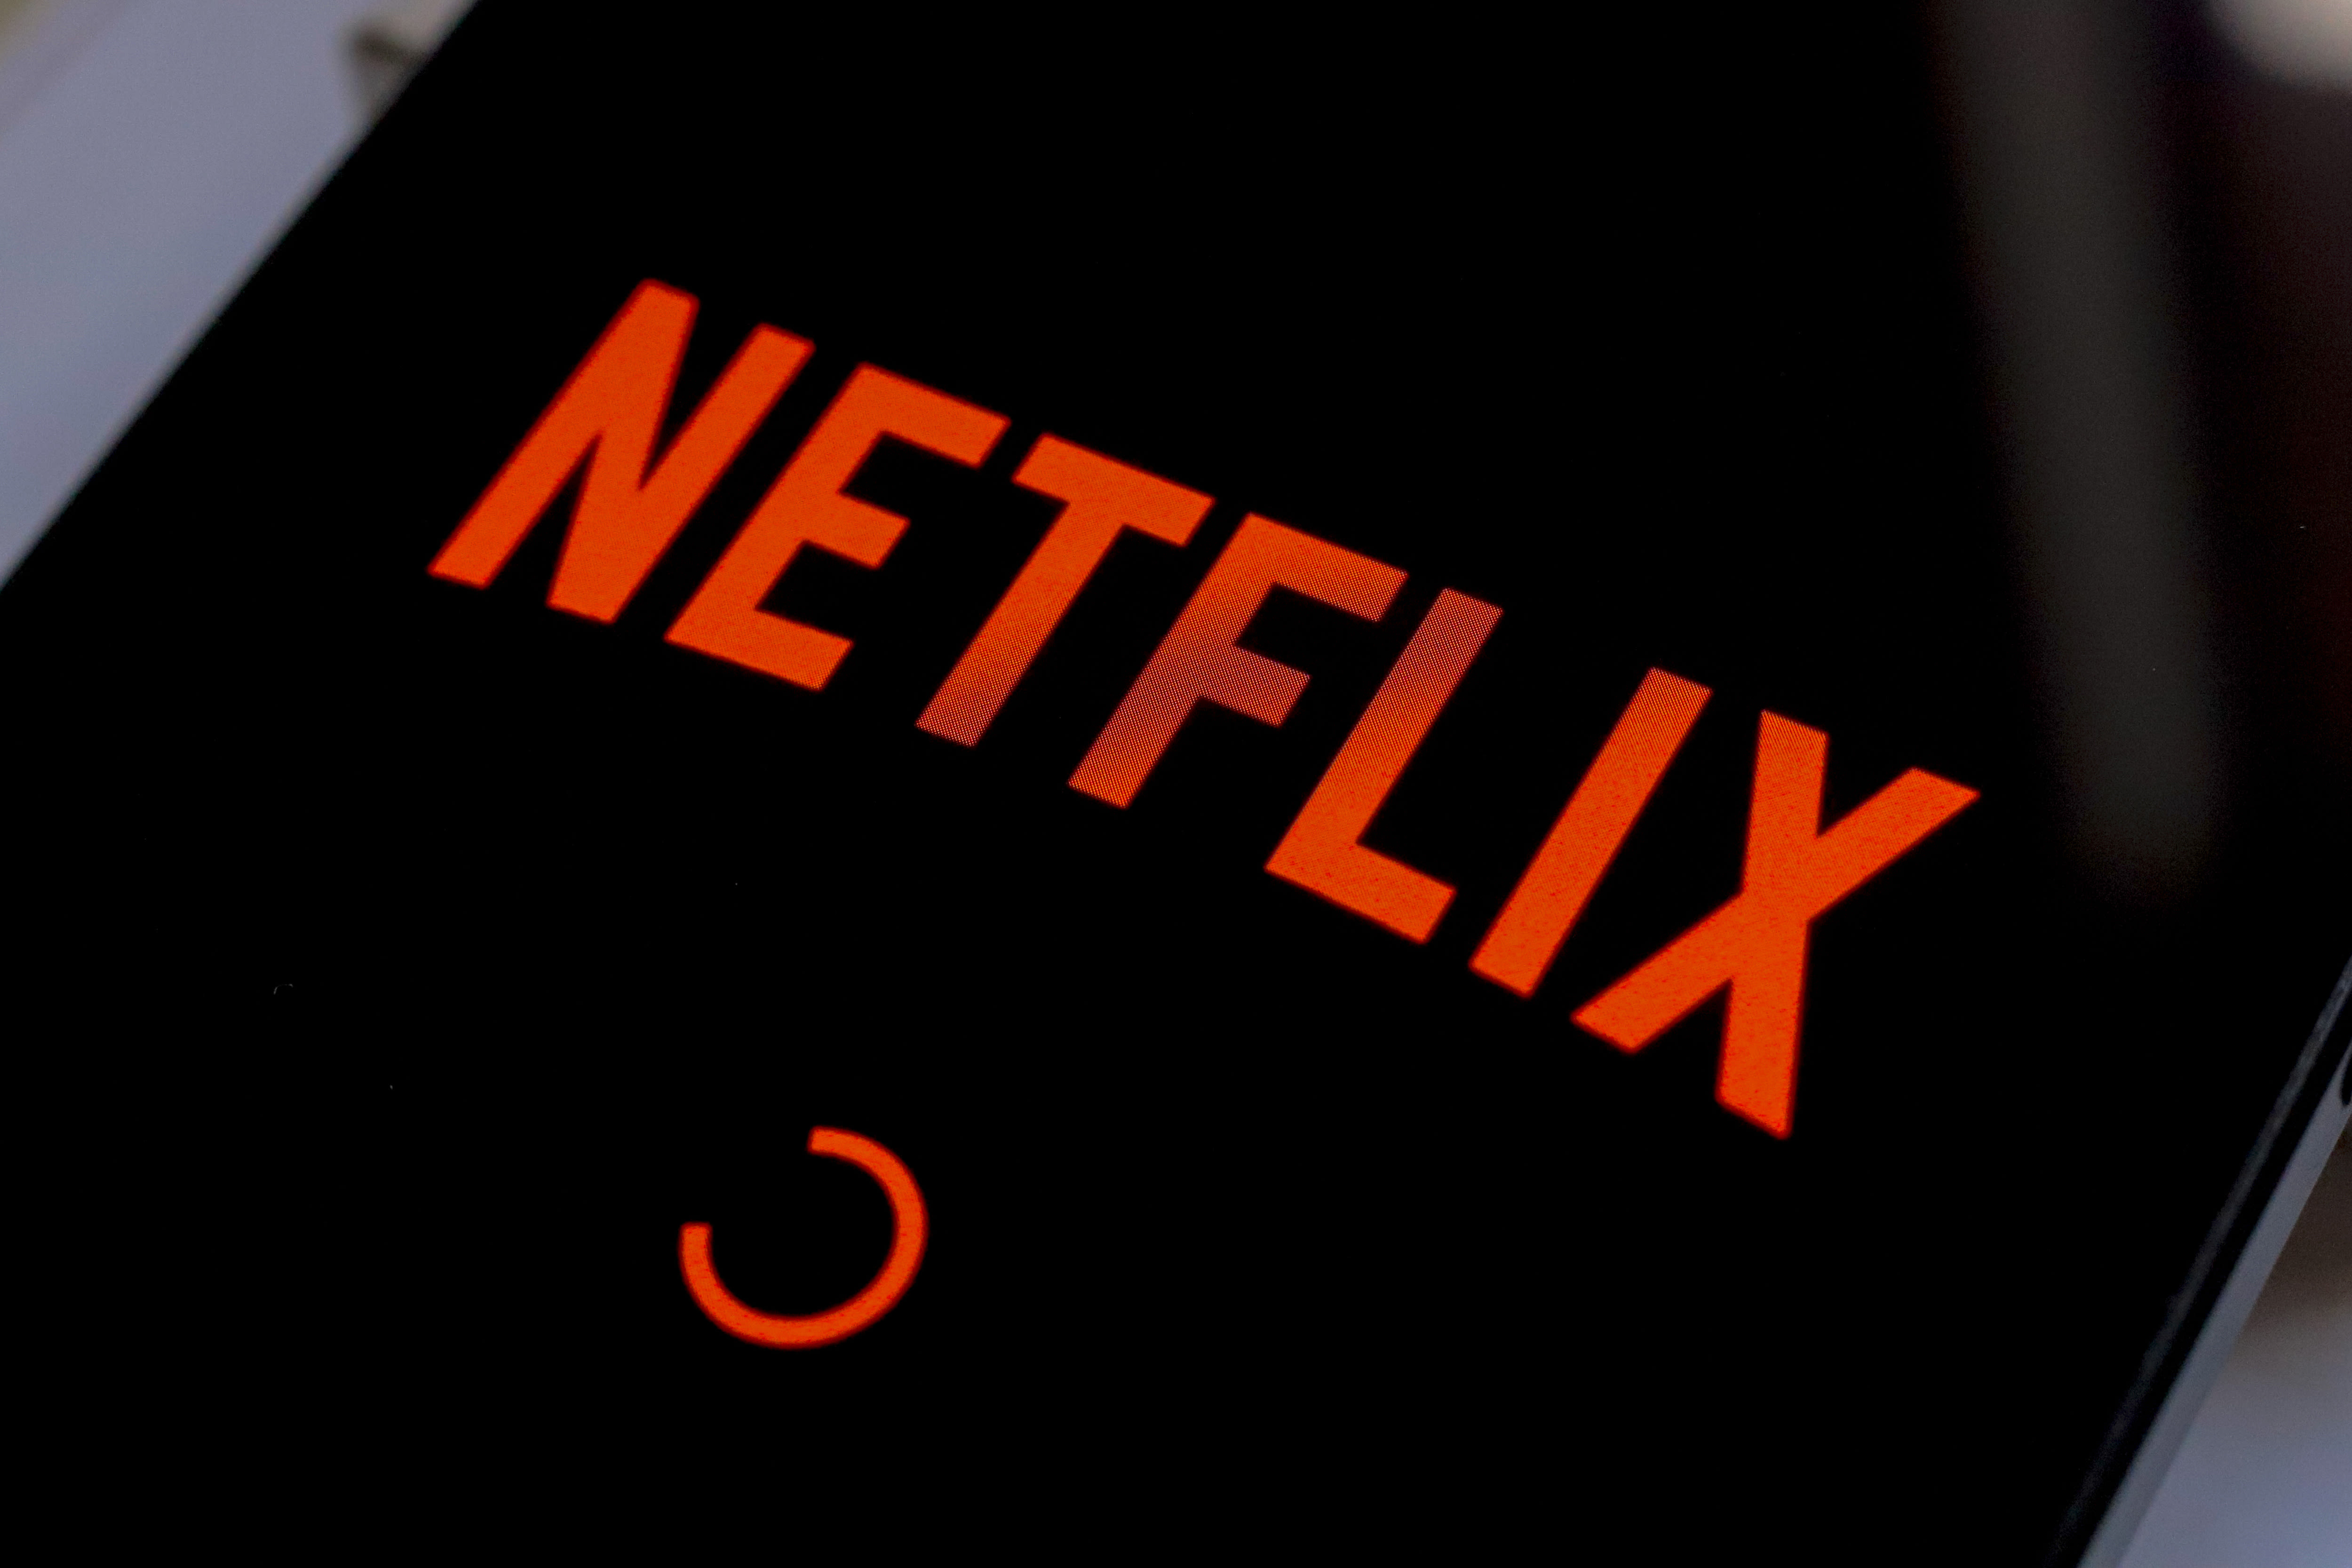 Netflix stock under pressure but here's why one analyst sees the pullback as a buying opportunity